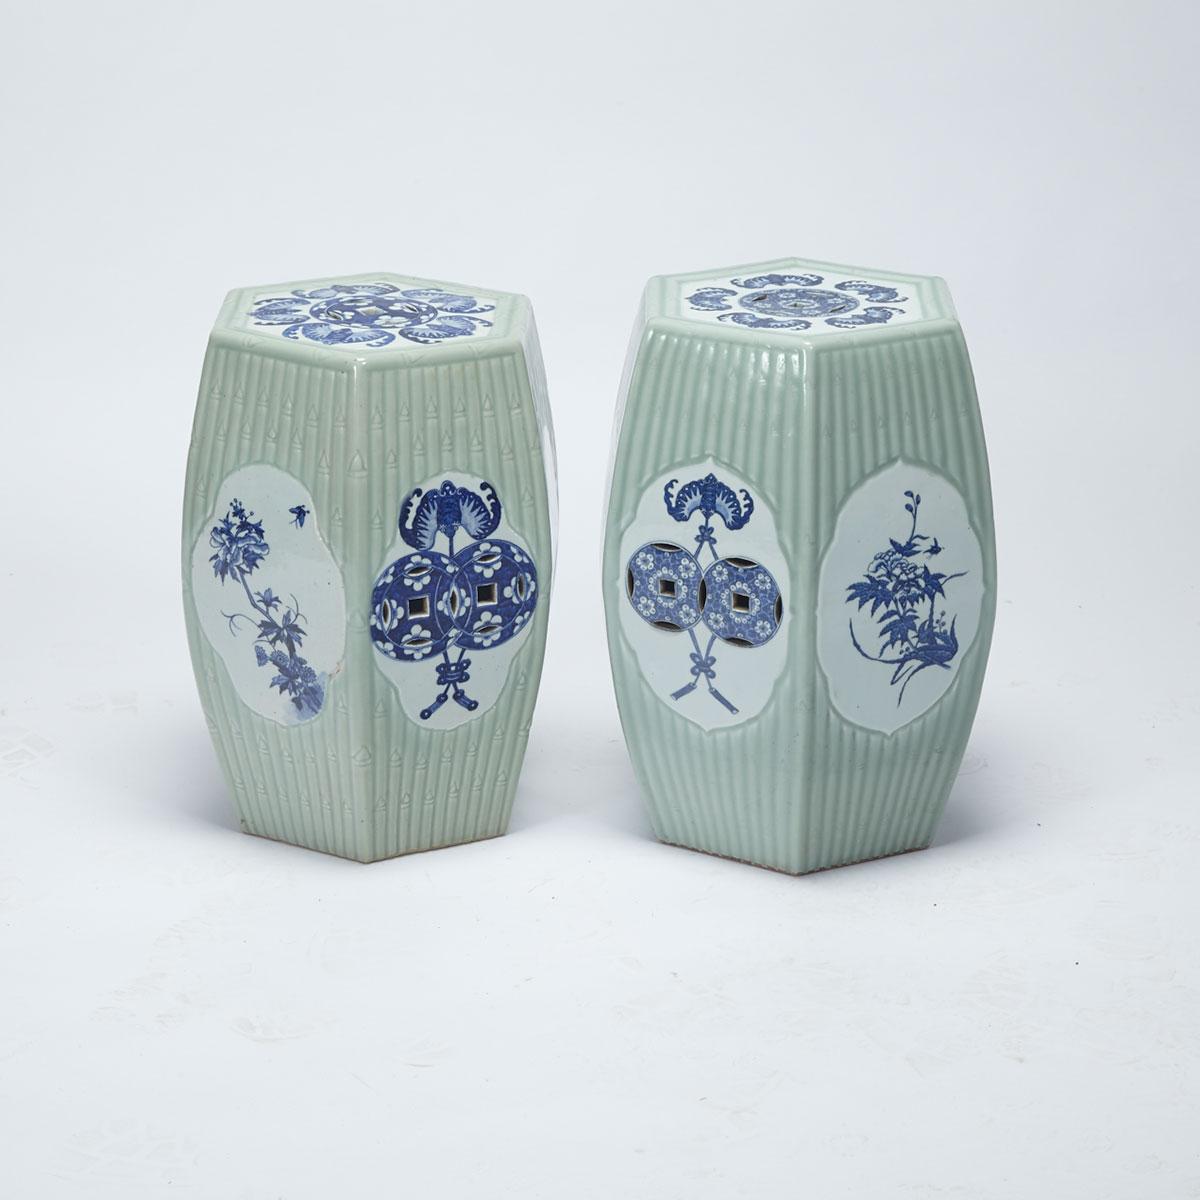 Pair of Blue and White Celadon Ground Stools, Republican Period